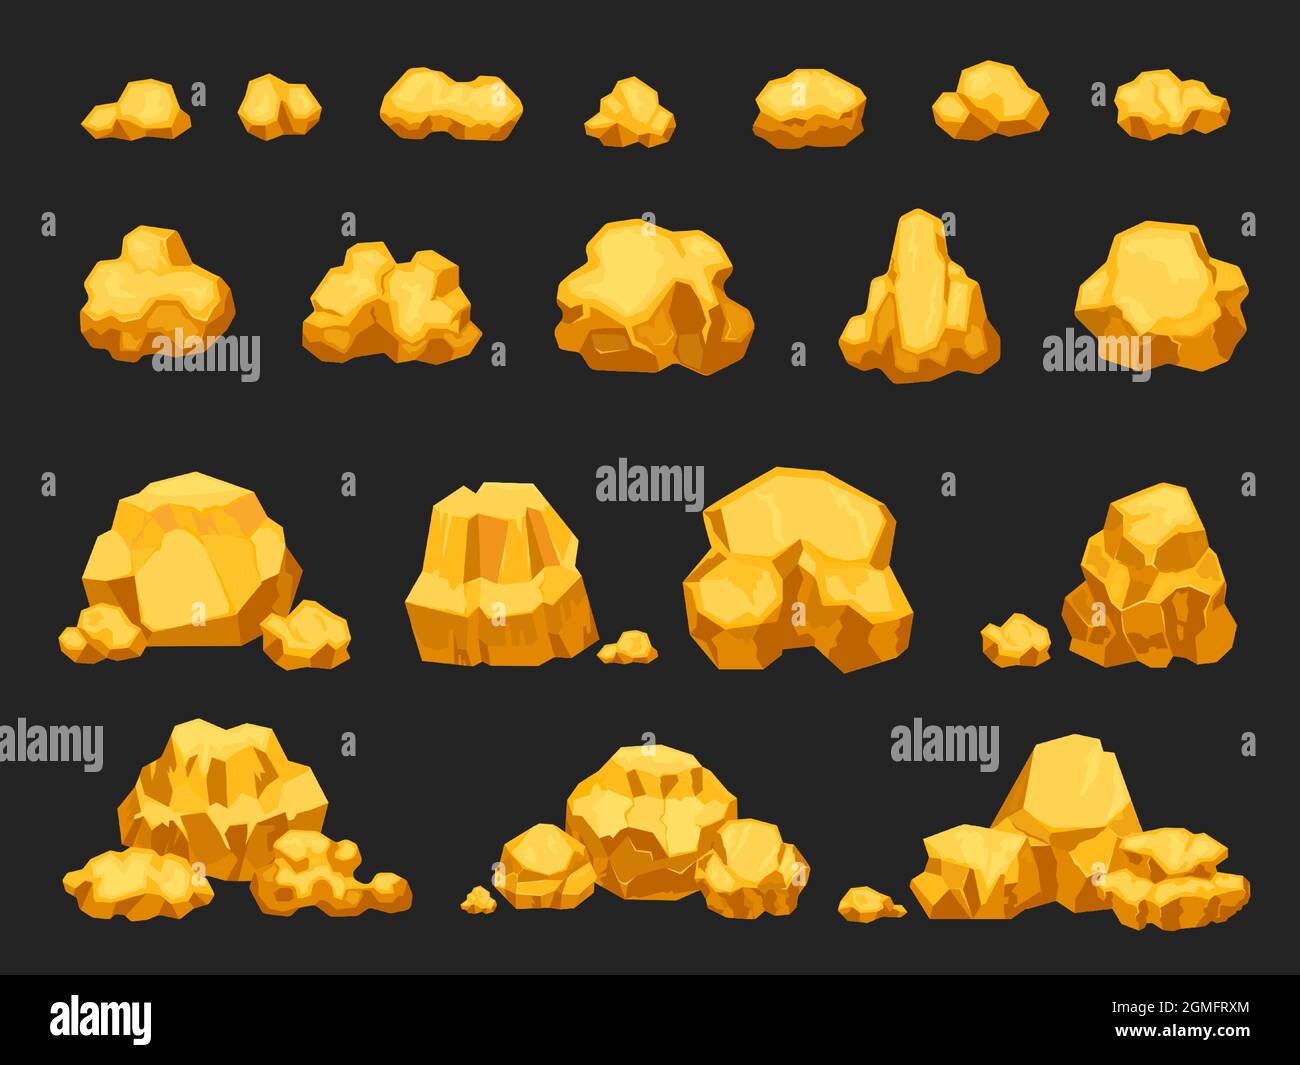 Cartoon gold mine nuggets, boulders, stones and piles. Natural shiny solid golden rock heap. Jewel nugget icons for miner game vector set Stock Vector